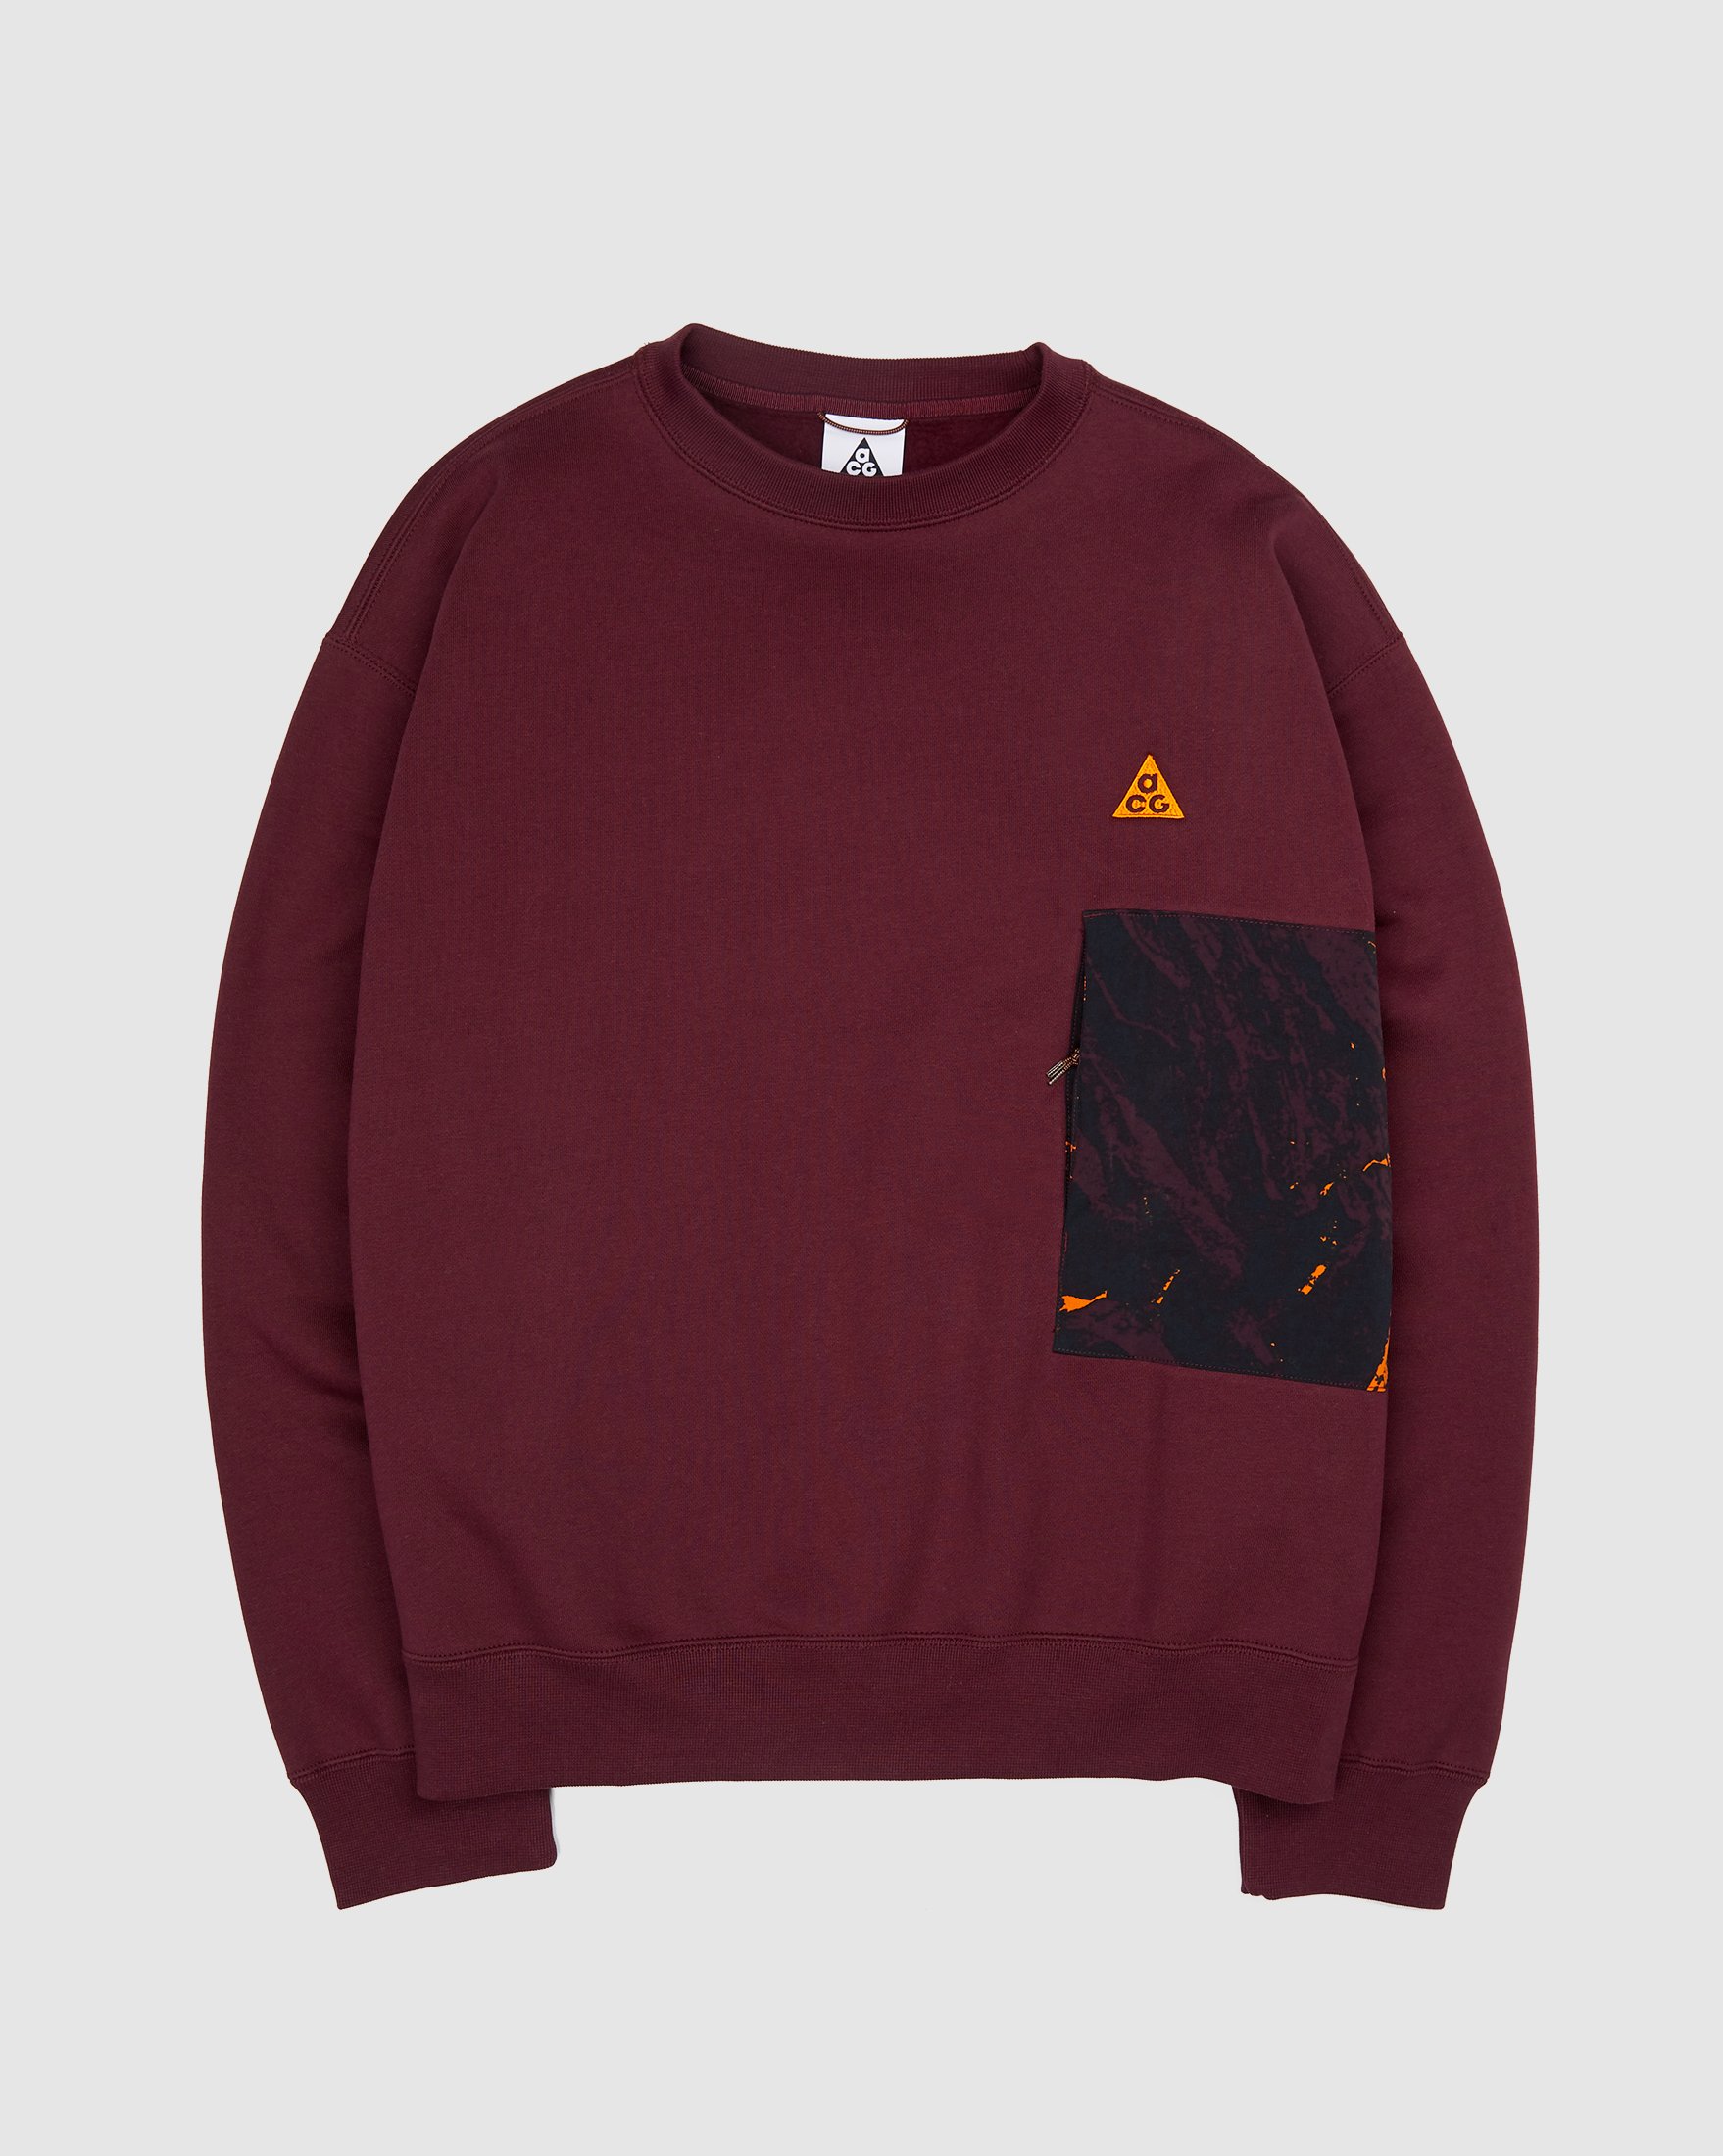 Nike ACG - Allover Print Crew Sweater Burgundy - Clothing - Red - Image 1